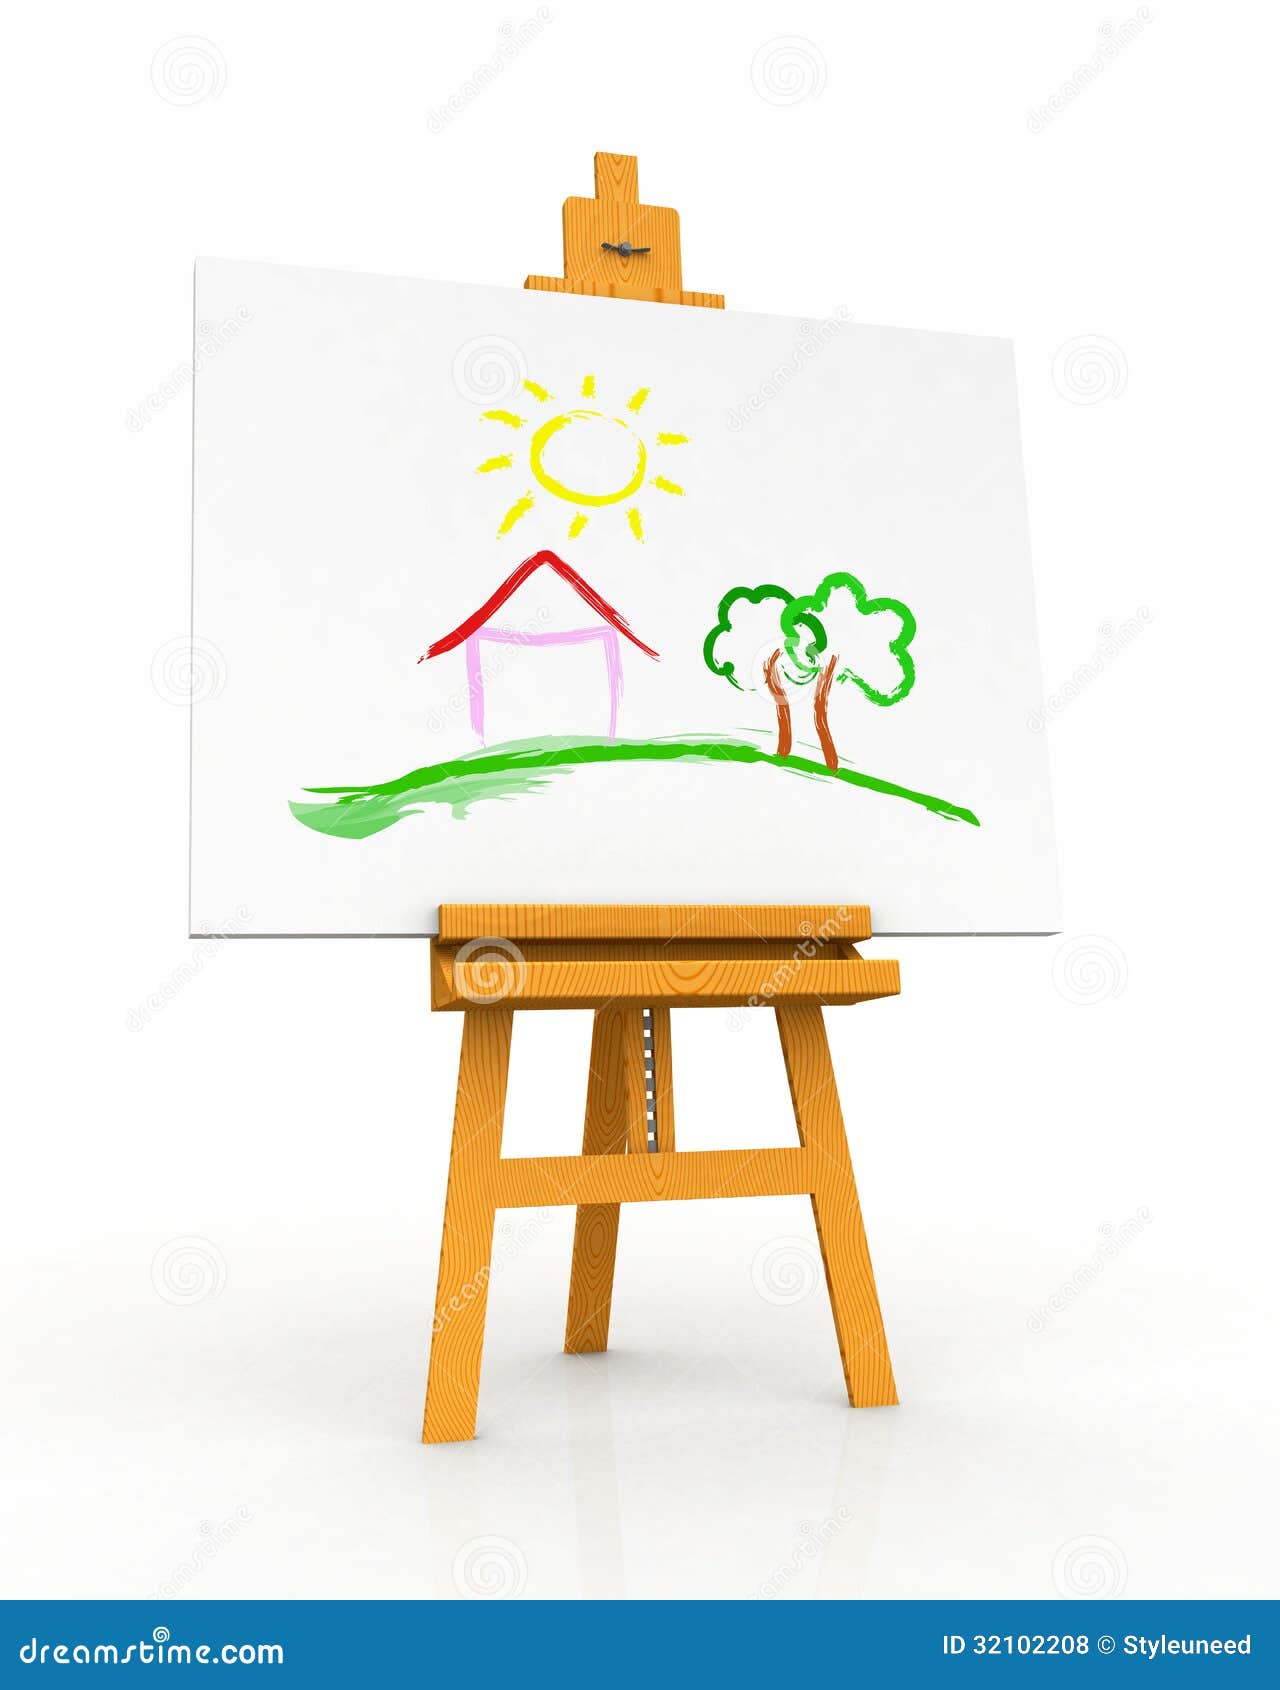 House Painting On Easel Royalty Free Stock Photos - Image: 32102208